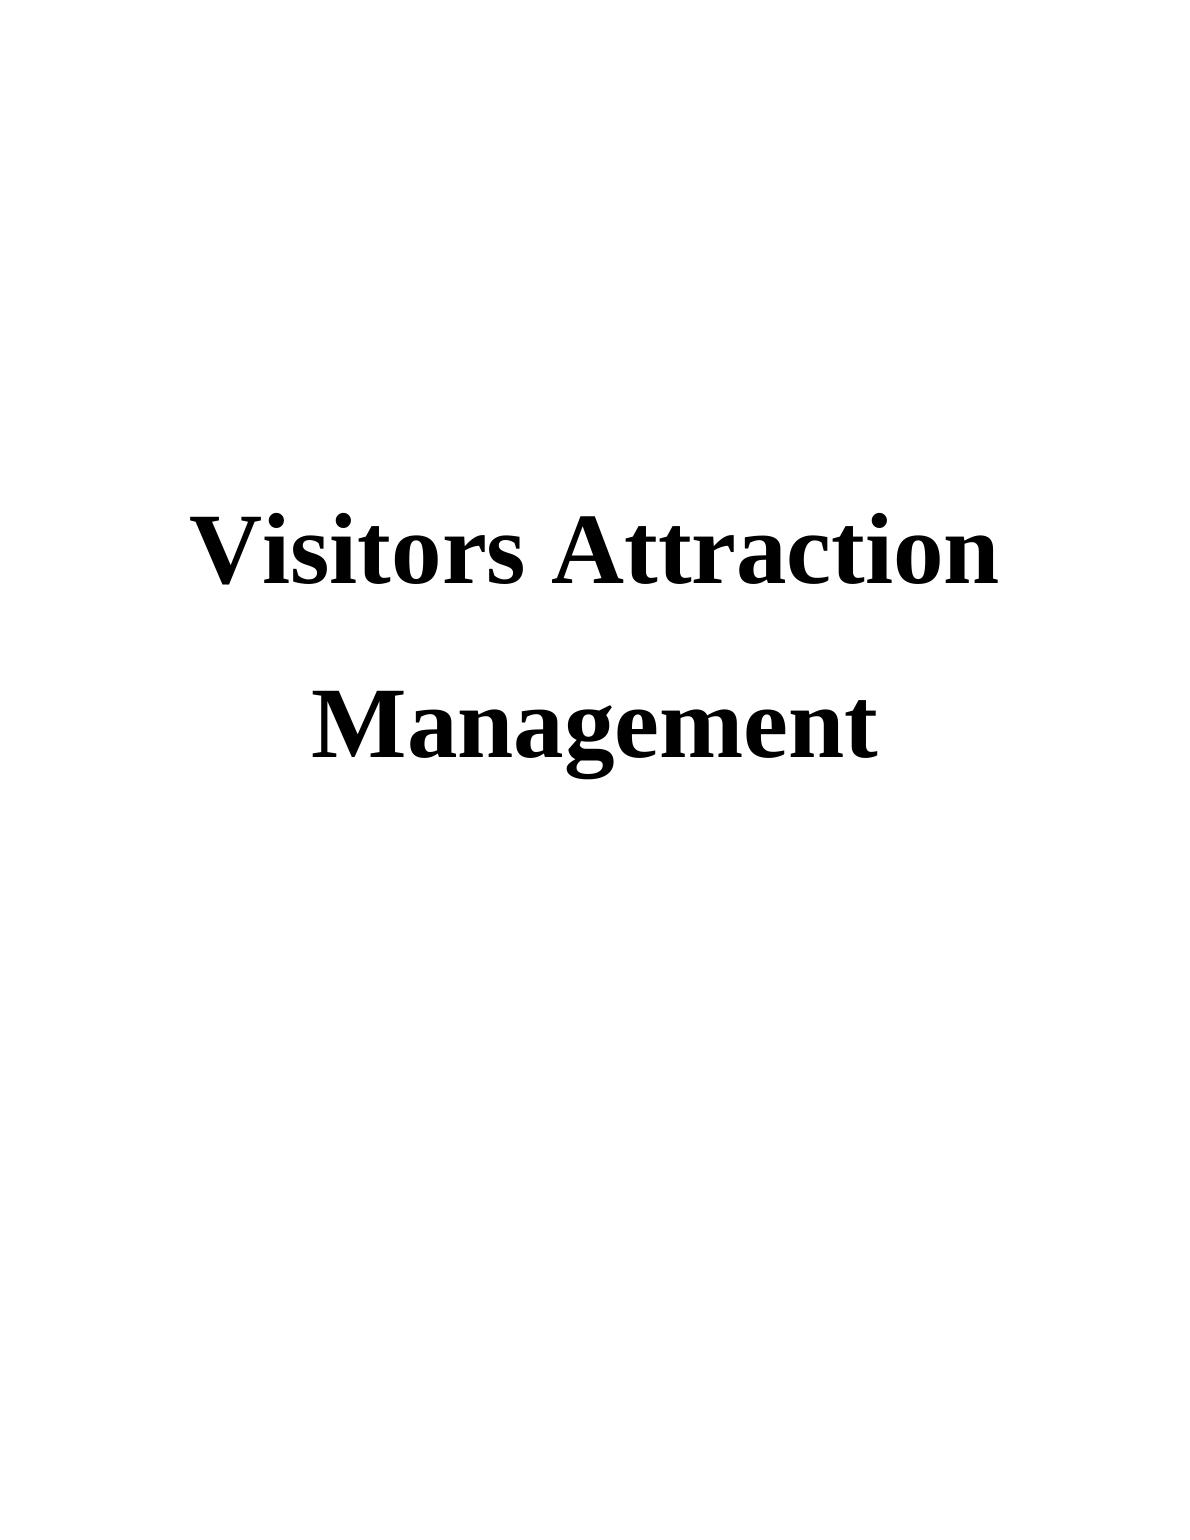 Visitors Attraction Management Report_1